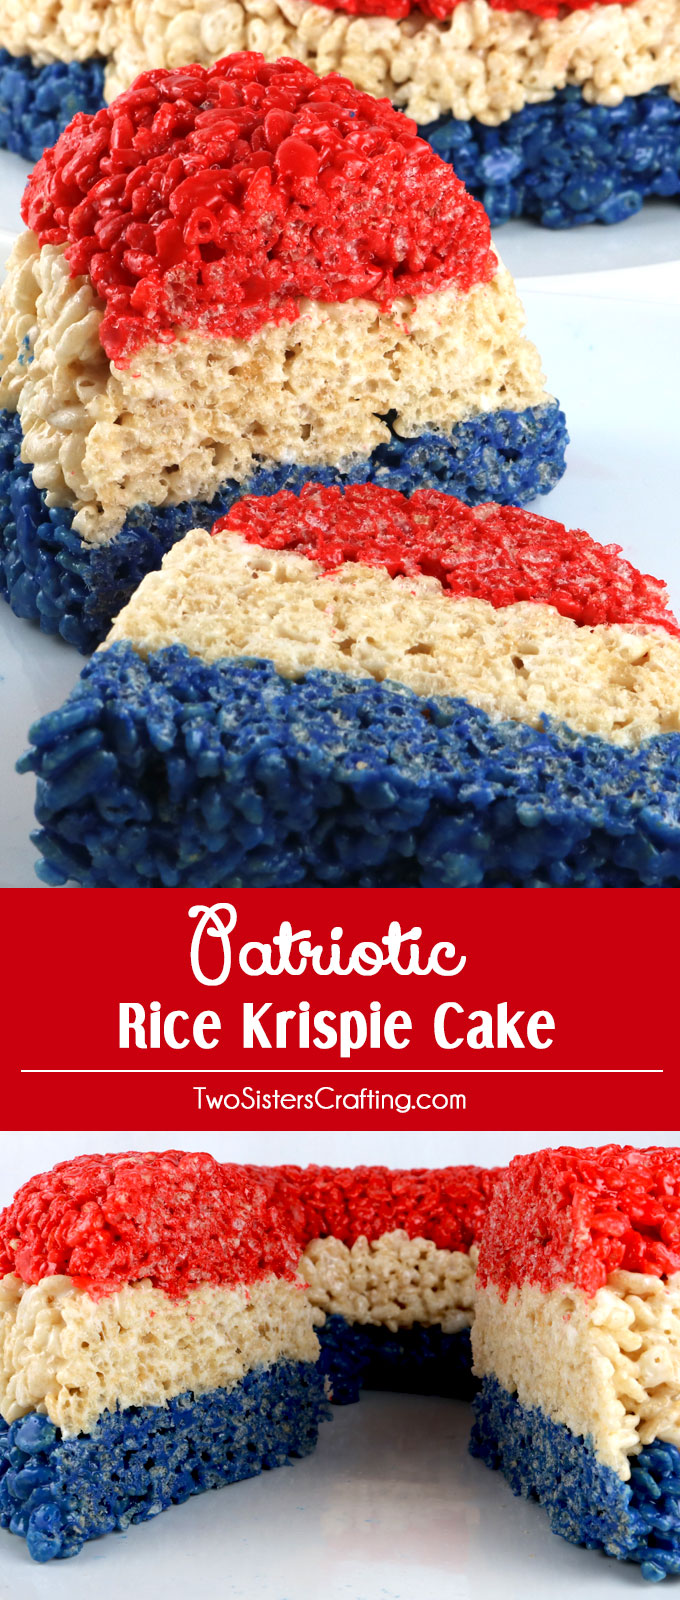 We've found 15 of the Best 4th of July Cakes. Pretty, yummy and Red White and Blue, these fun and easy Cake Recipes are perfect for your Fourth of July party or Memorial Day barbecue. These 15 Patriotic Cakes are some of the best 4th of July desserts that we could find. Pin these easy to make Independence Day Treats for later and follow us for more 4th of July Food Ideas. 